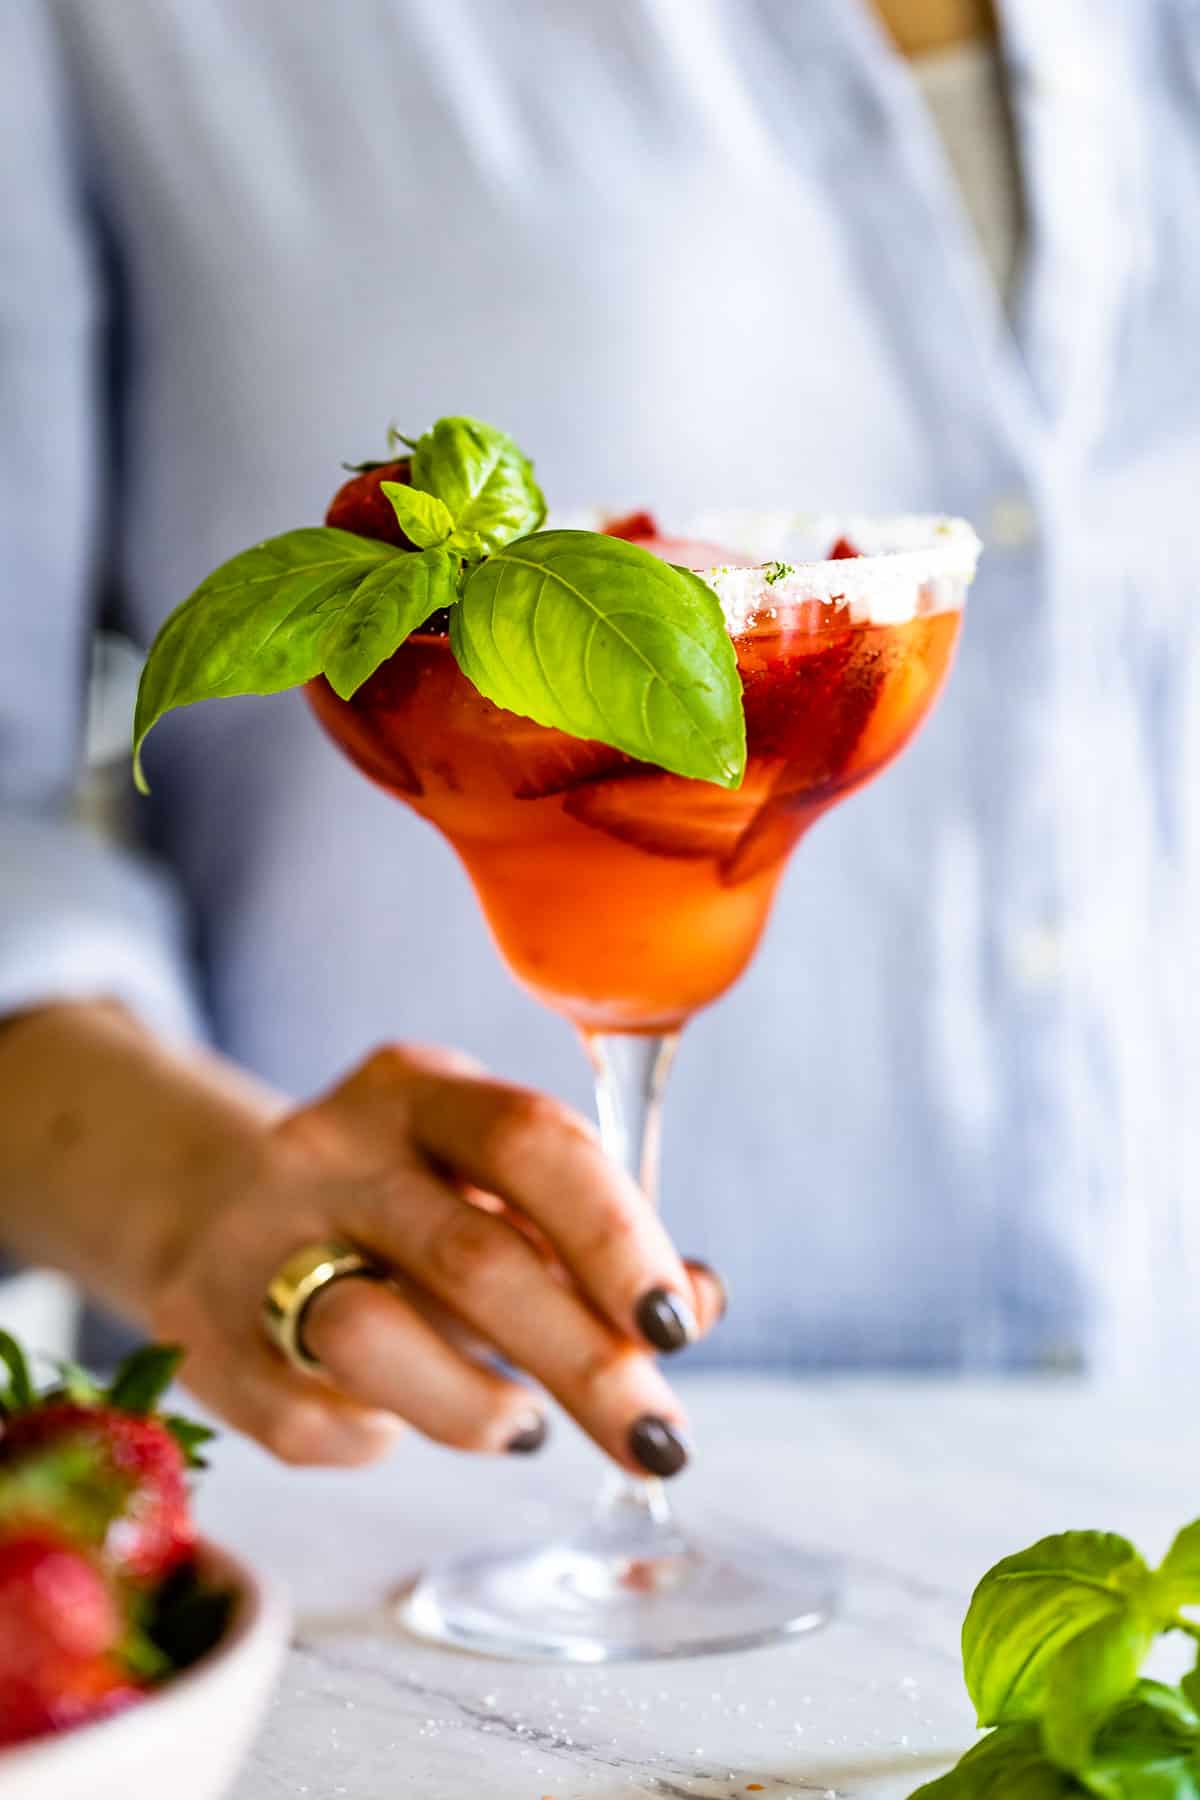 Strawberry Basil Margarita being served by a woman